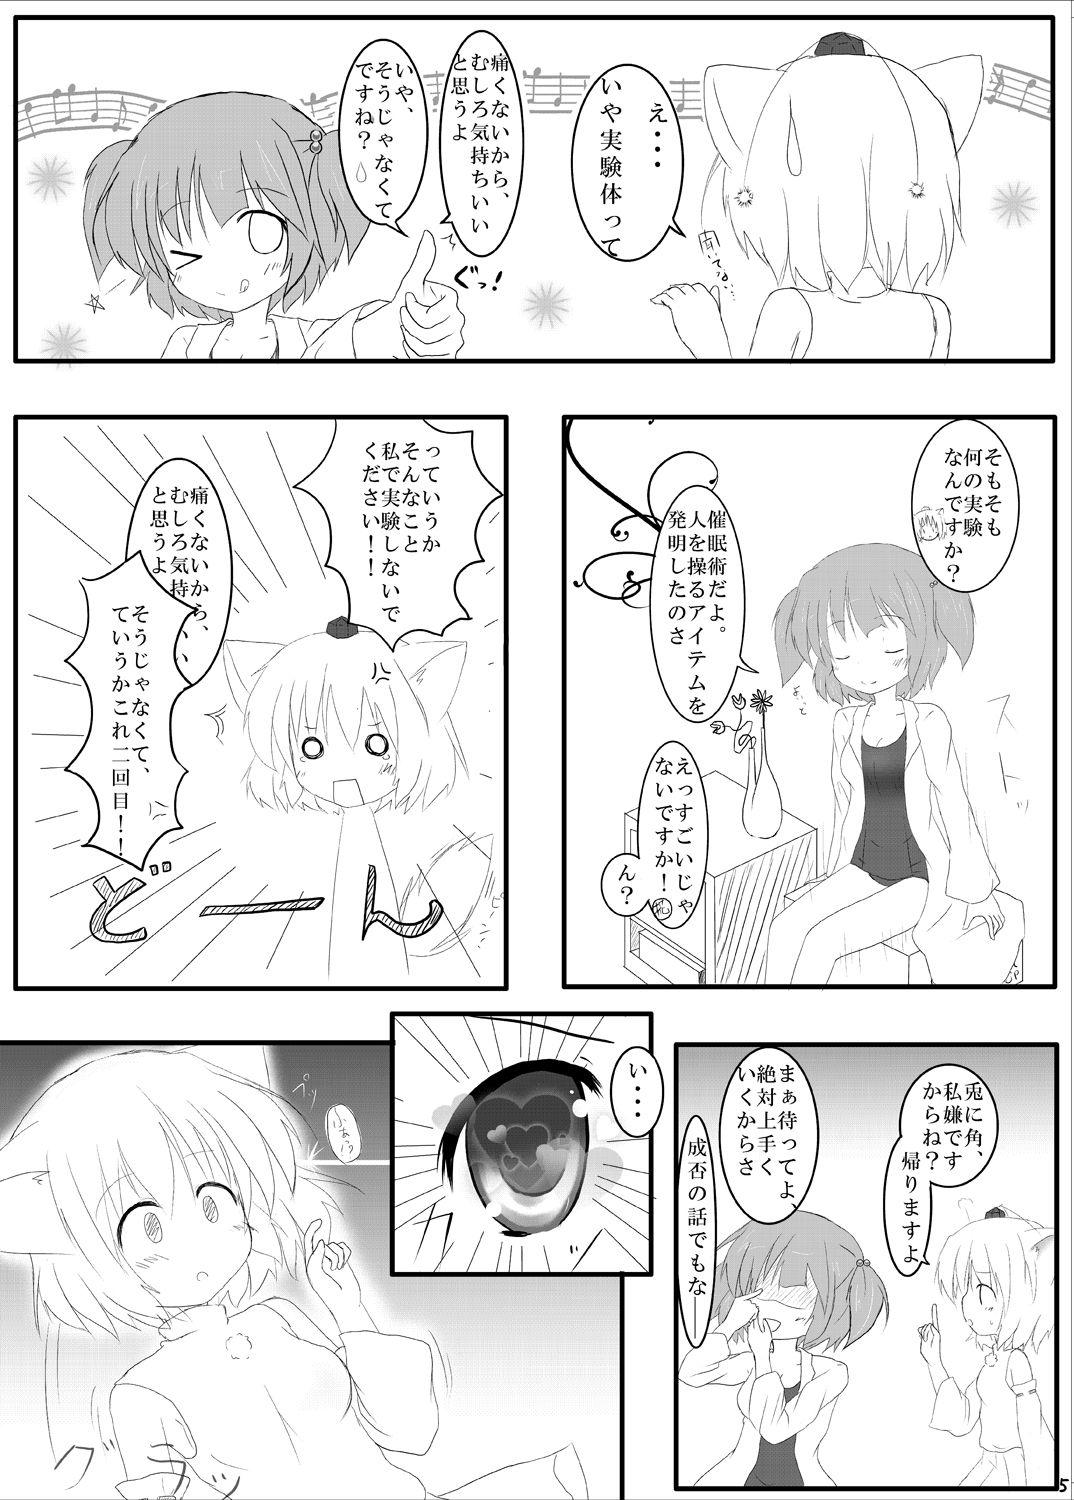 Cheating H na "Me" ni Acchatta! - Touhou project Dress - Page 4